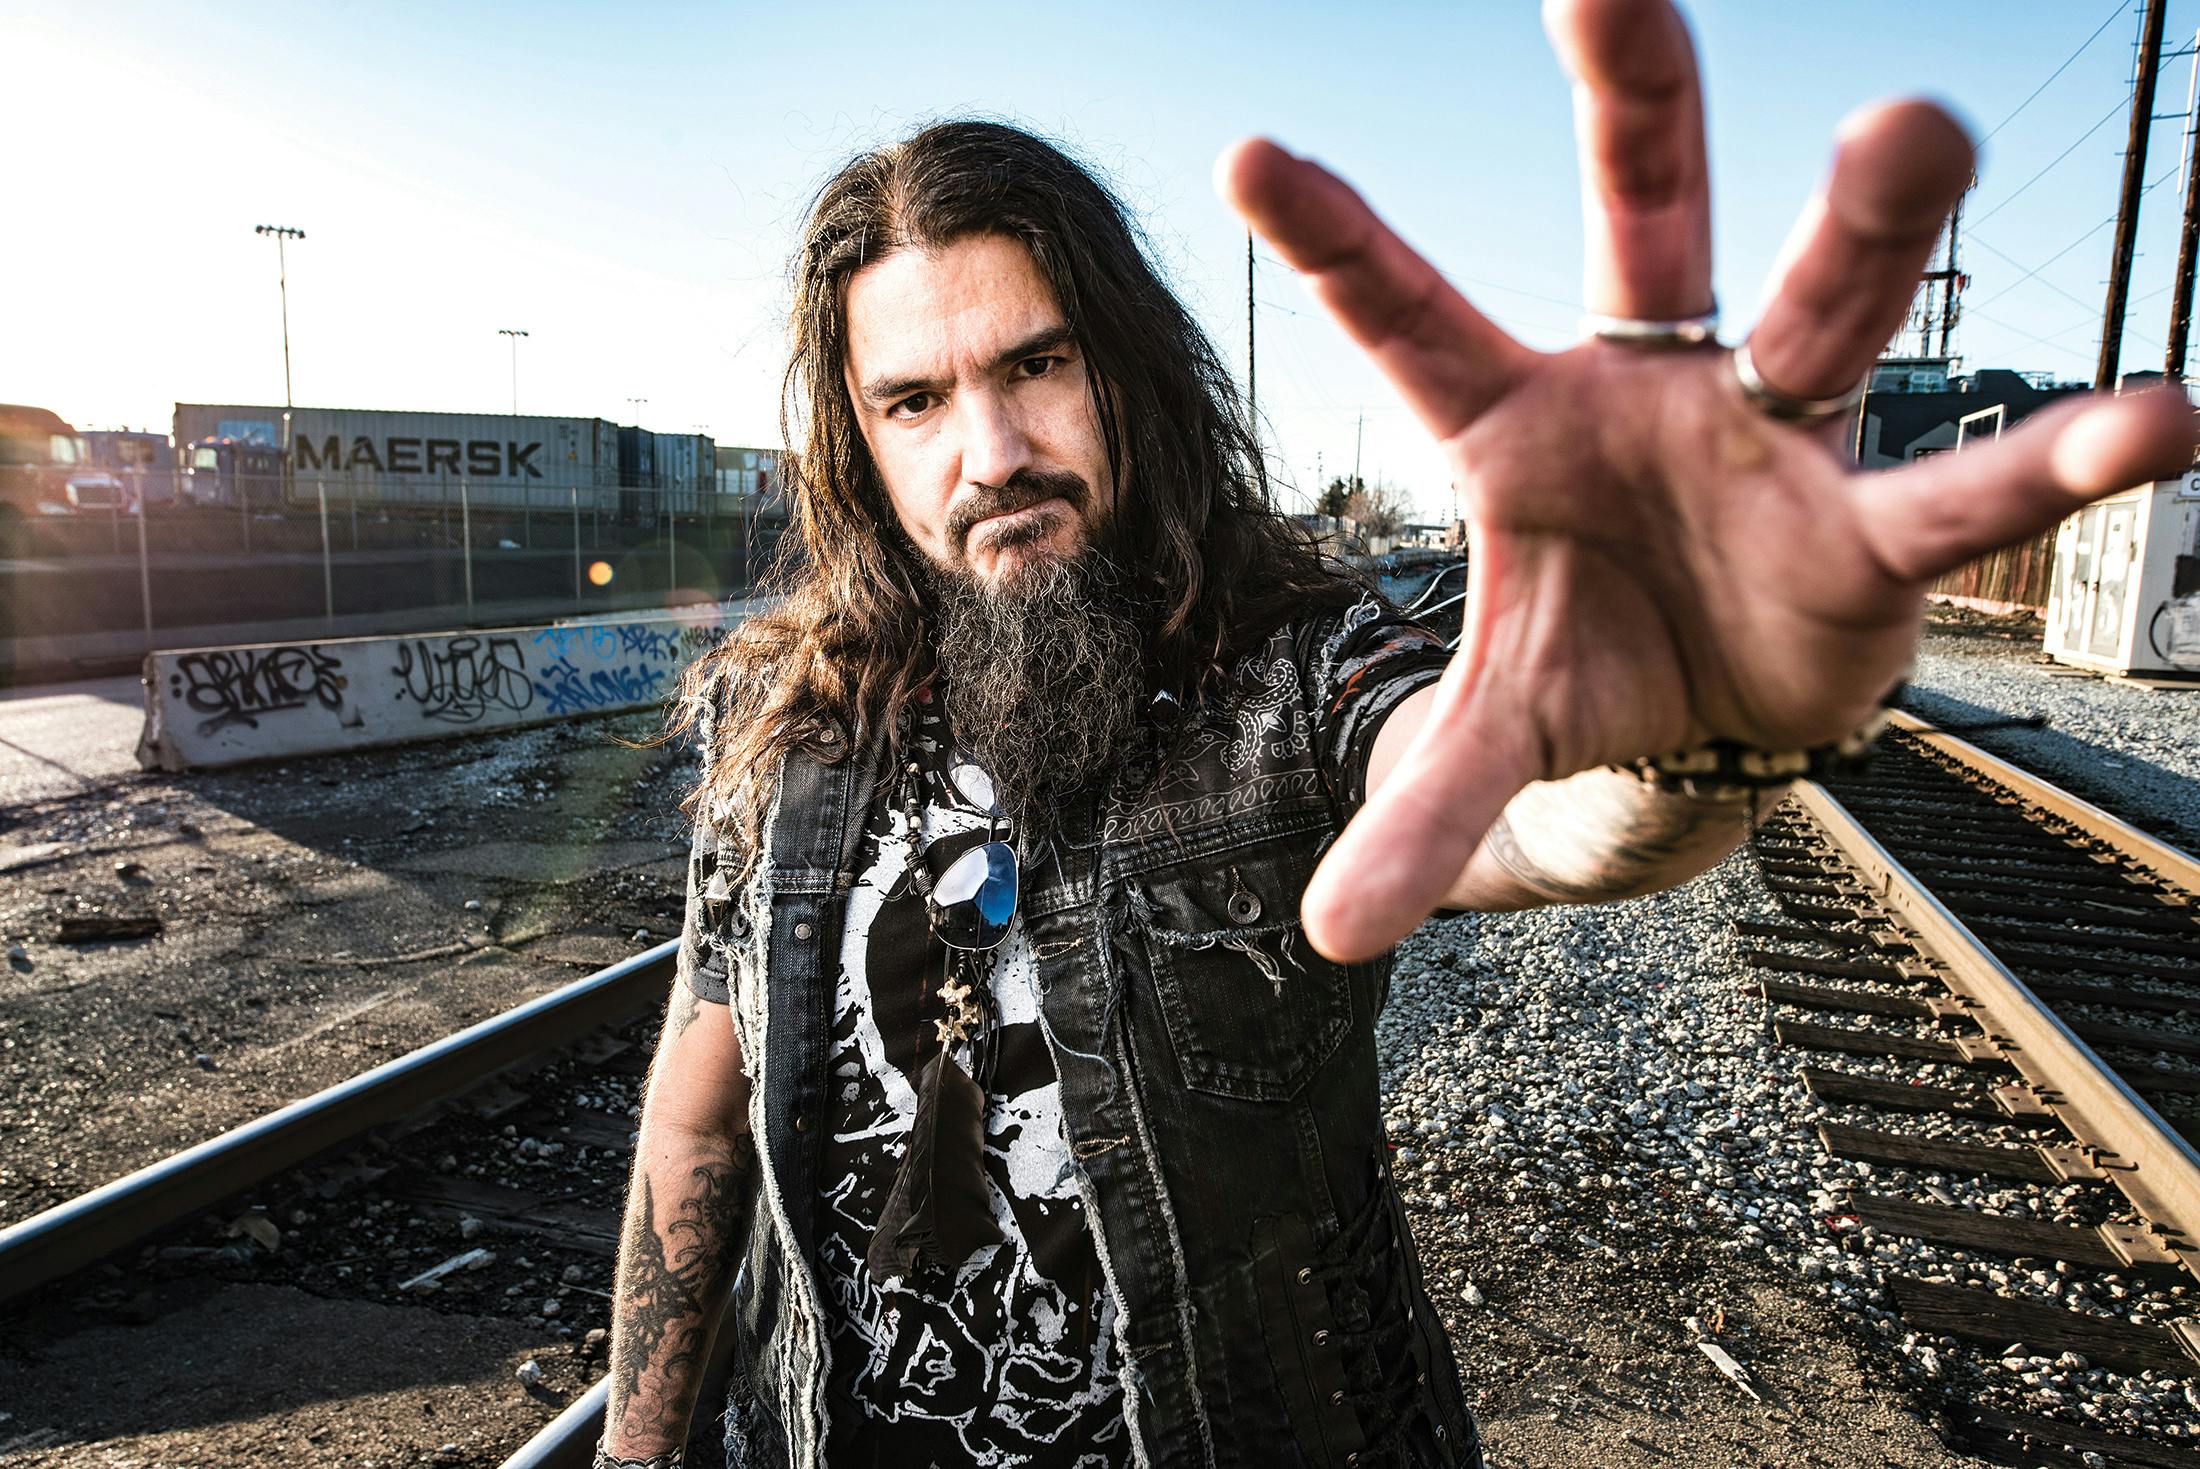 Robb Flynn responds to abusive comments and death threats online